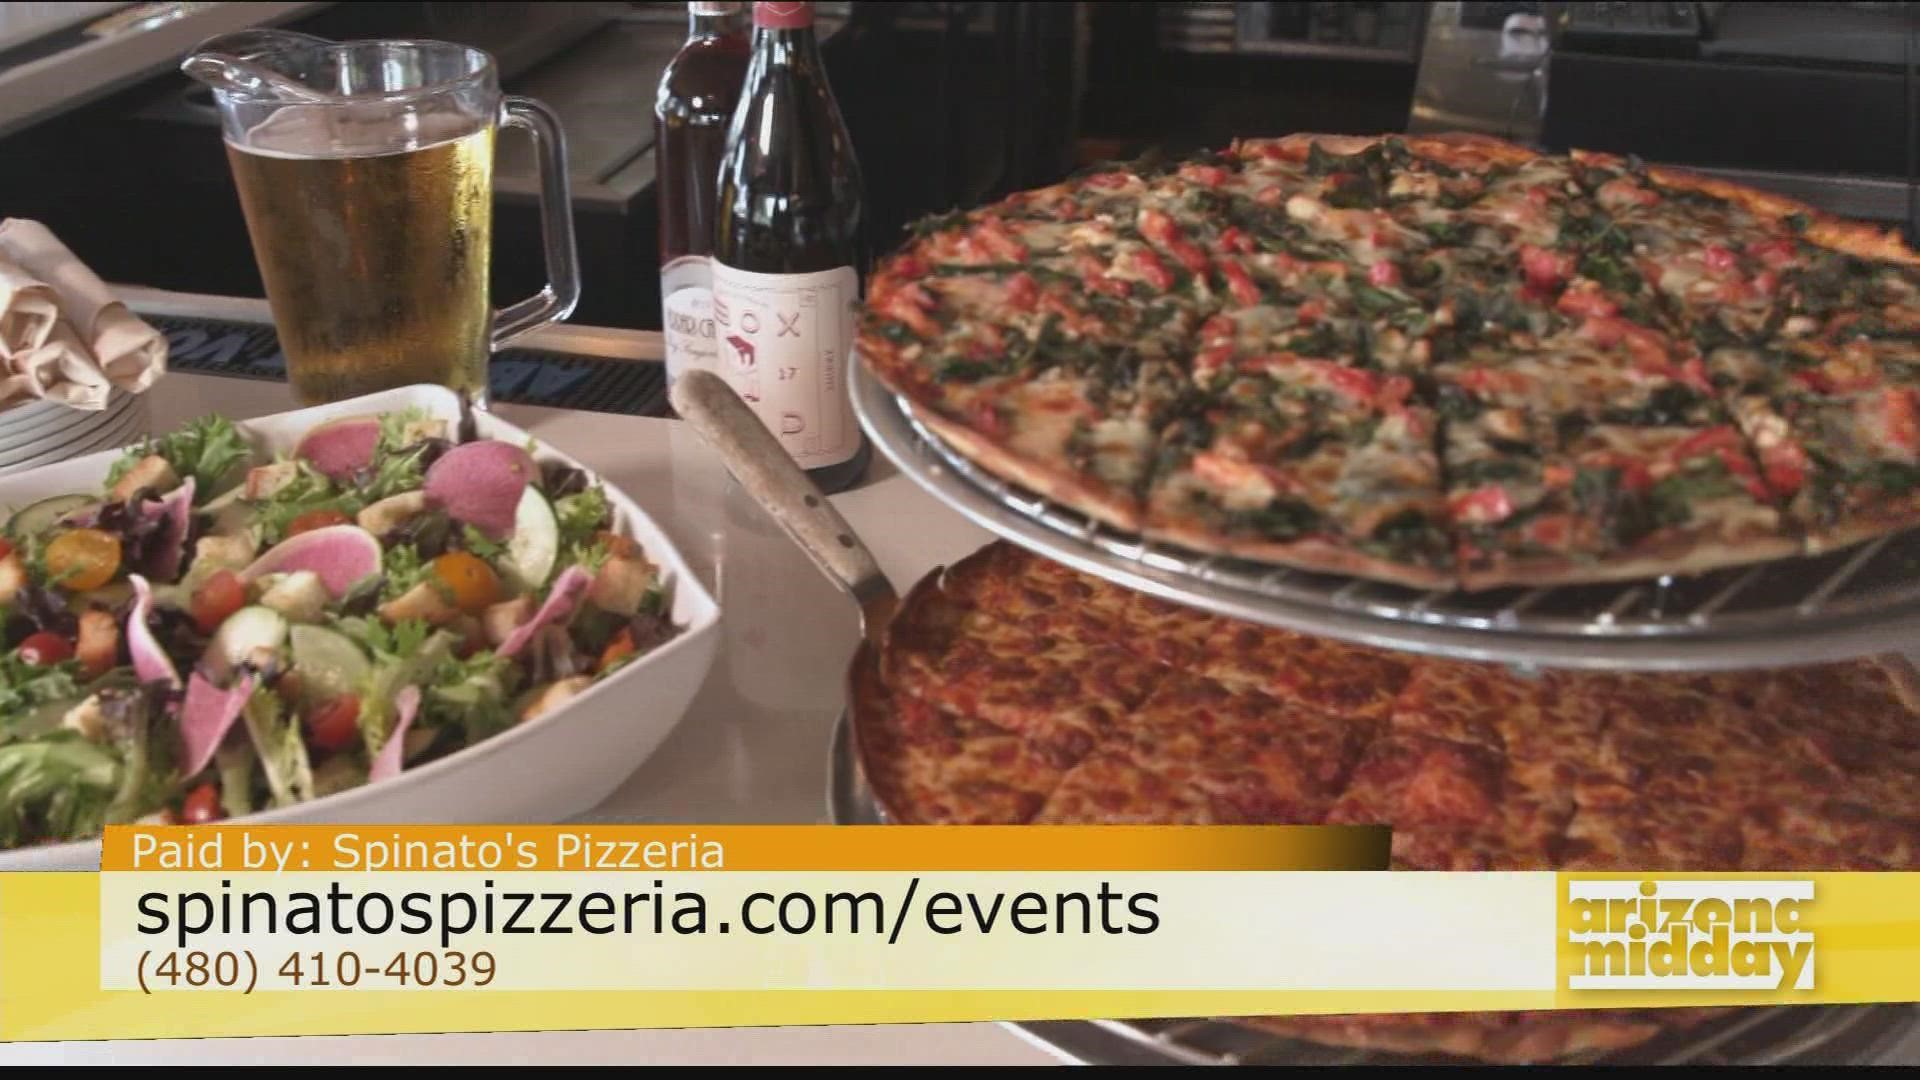 Anthony Spinato & Chris Kienlen, with Spinato's Pizzeria, share the game day food options or event options